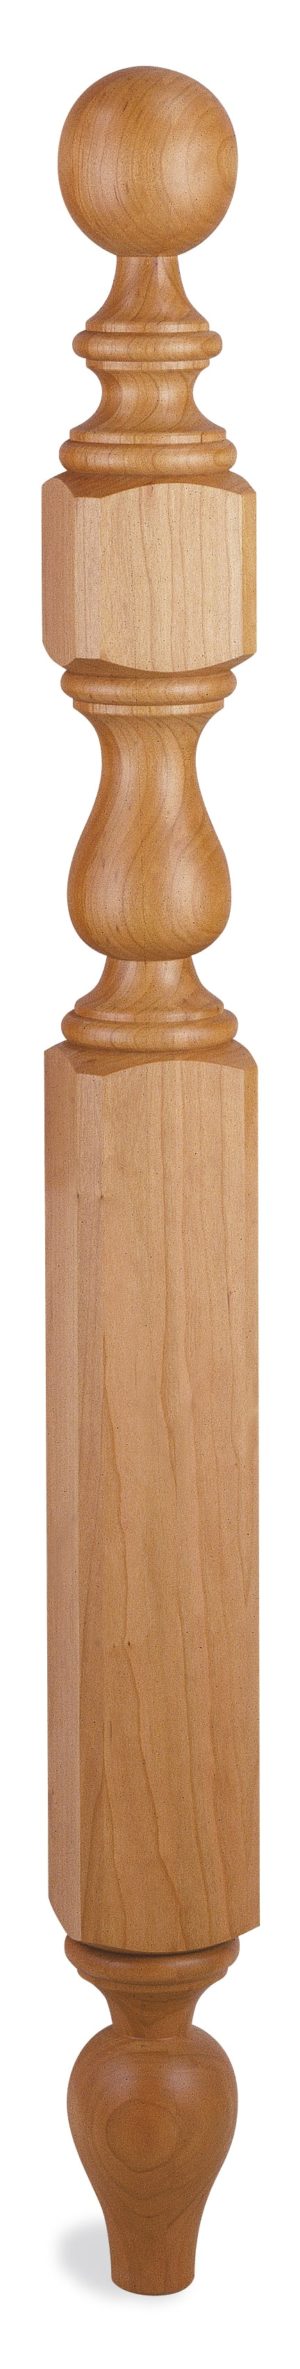 Furniture Bed Post And Finials Table, Wooden Bed Post Toppers Home Depot